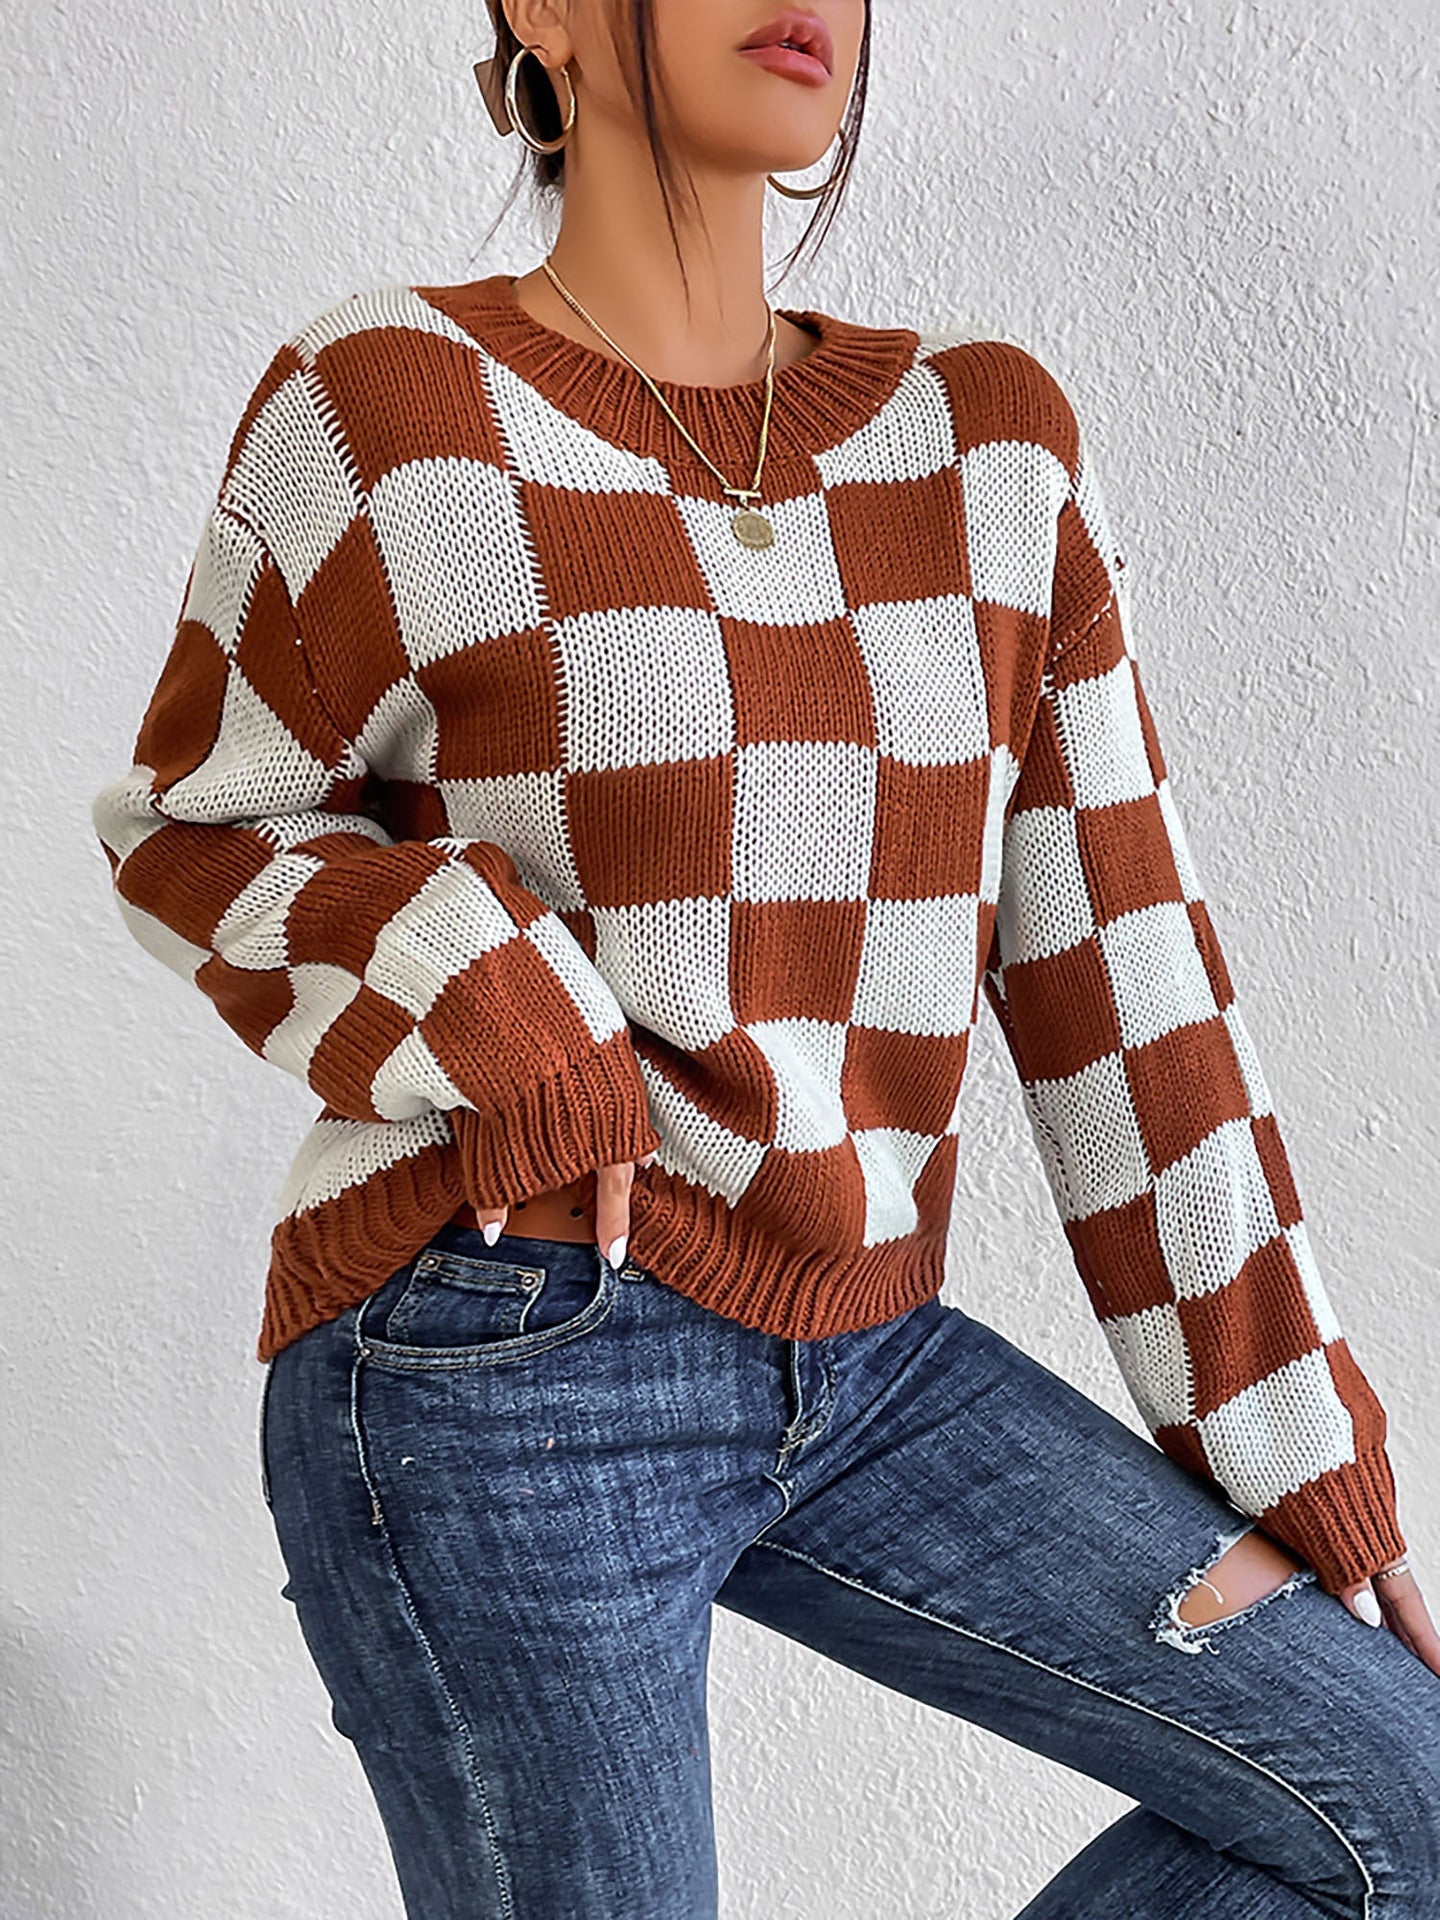 Women Clothing Long Sleeve Autumn Winter Color Matching Chessboard Plaid Loose Crew Neck Pullover Sweater Women